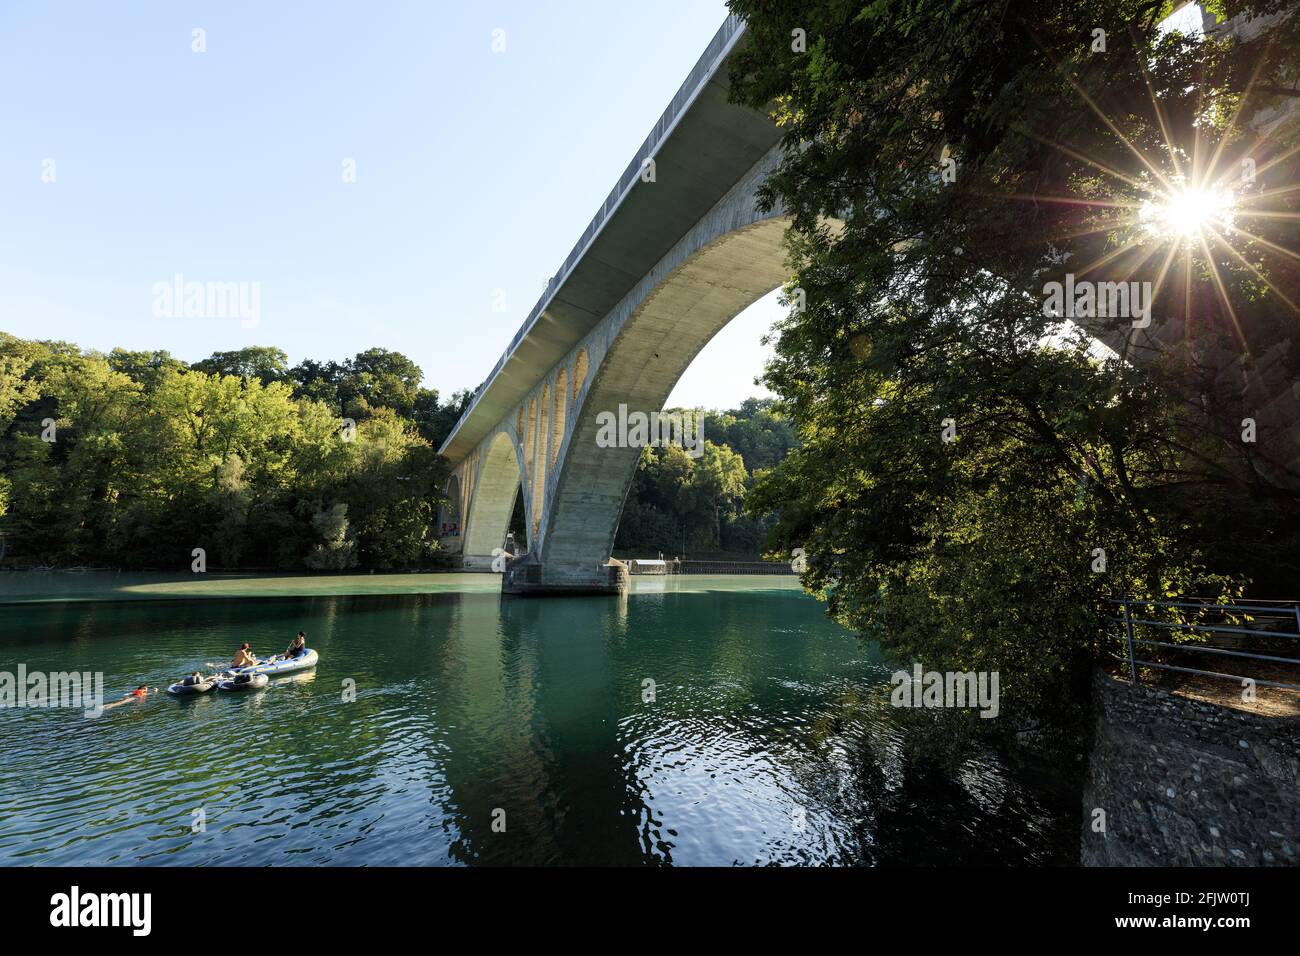 Switzerland, Canton of Geneva, Geneva, Jonction viaduct, confluence between the Rhone river and L'Arve river, swimming Stock Photo